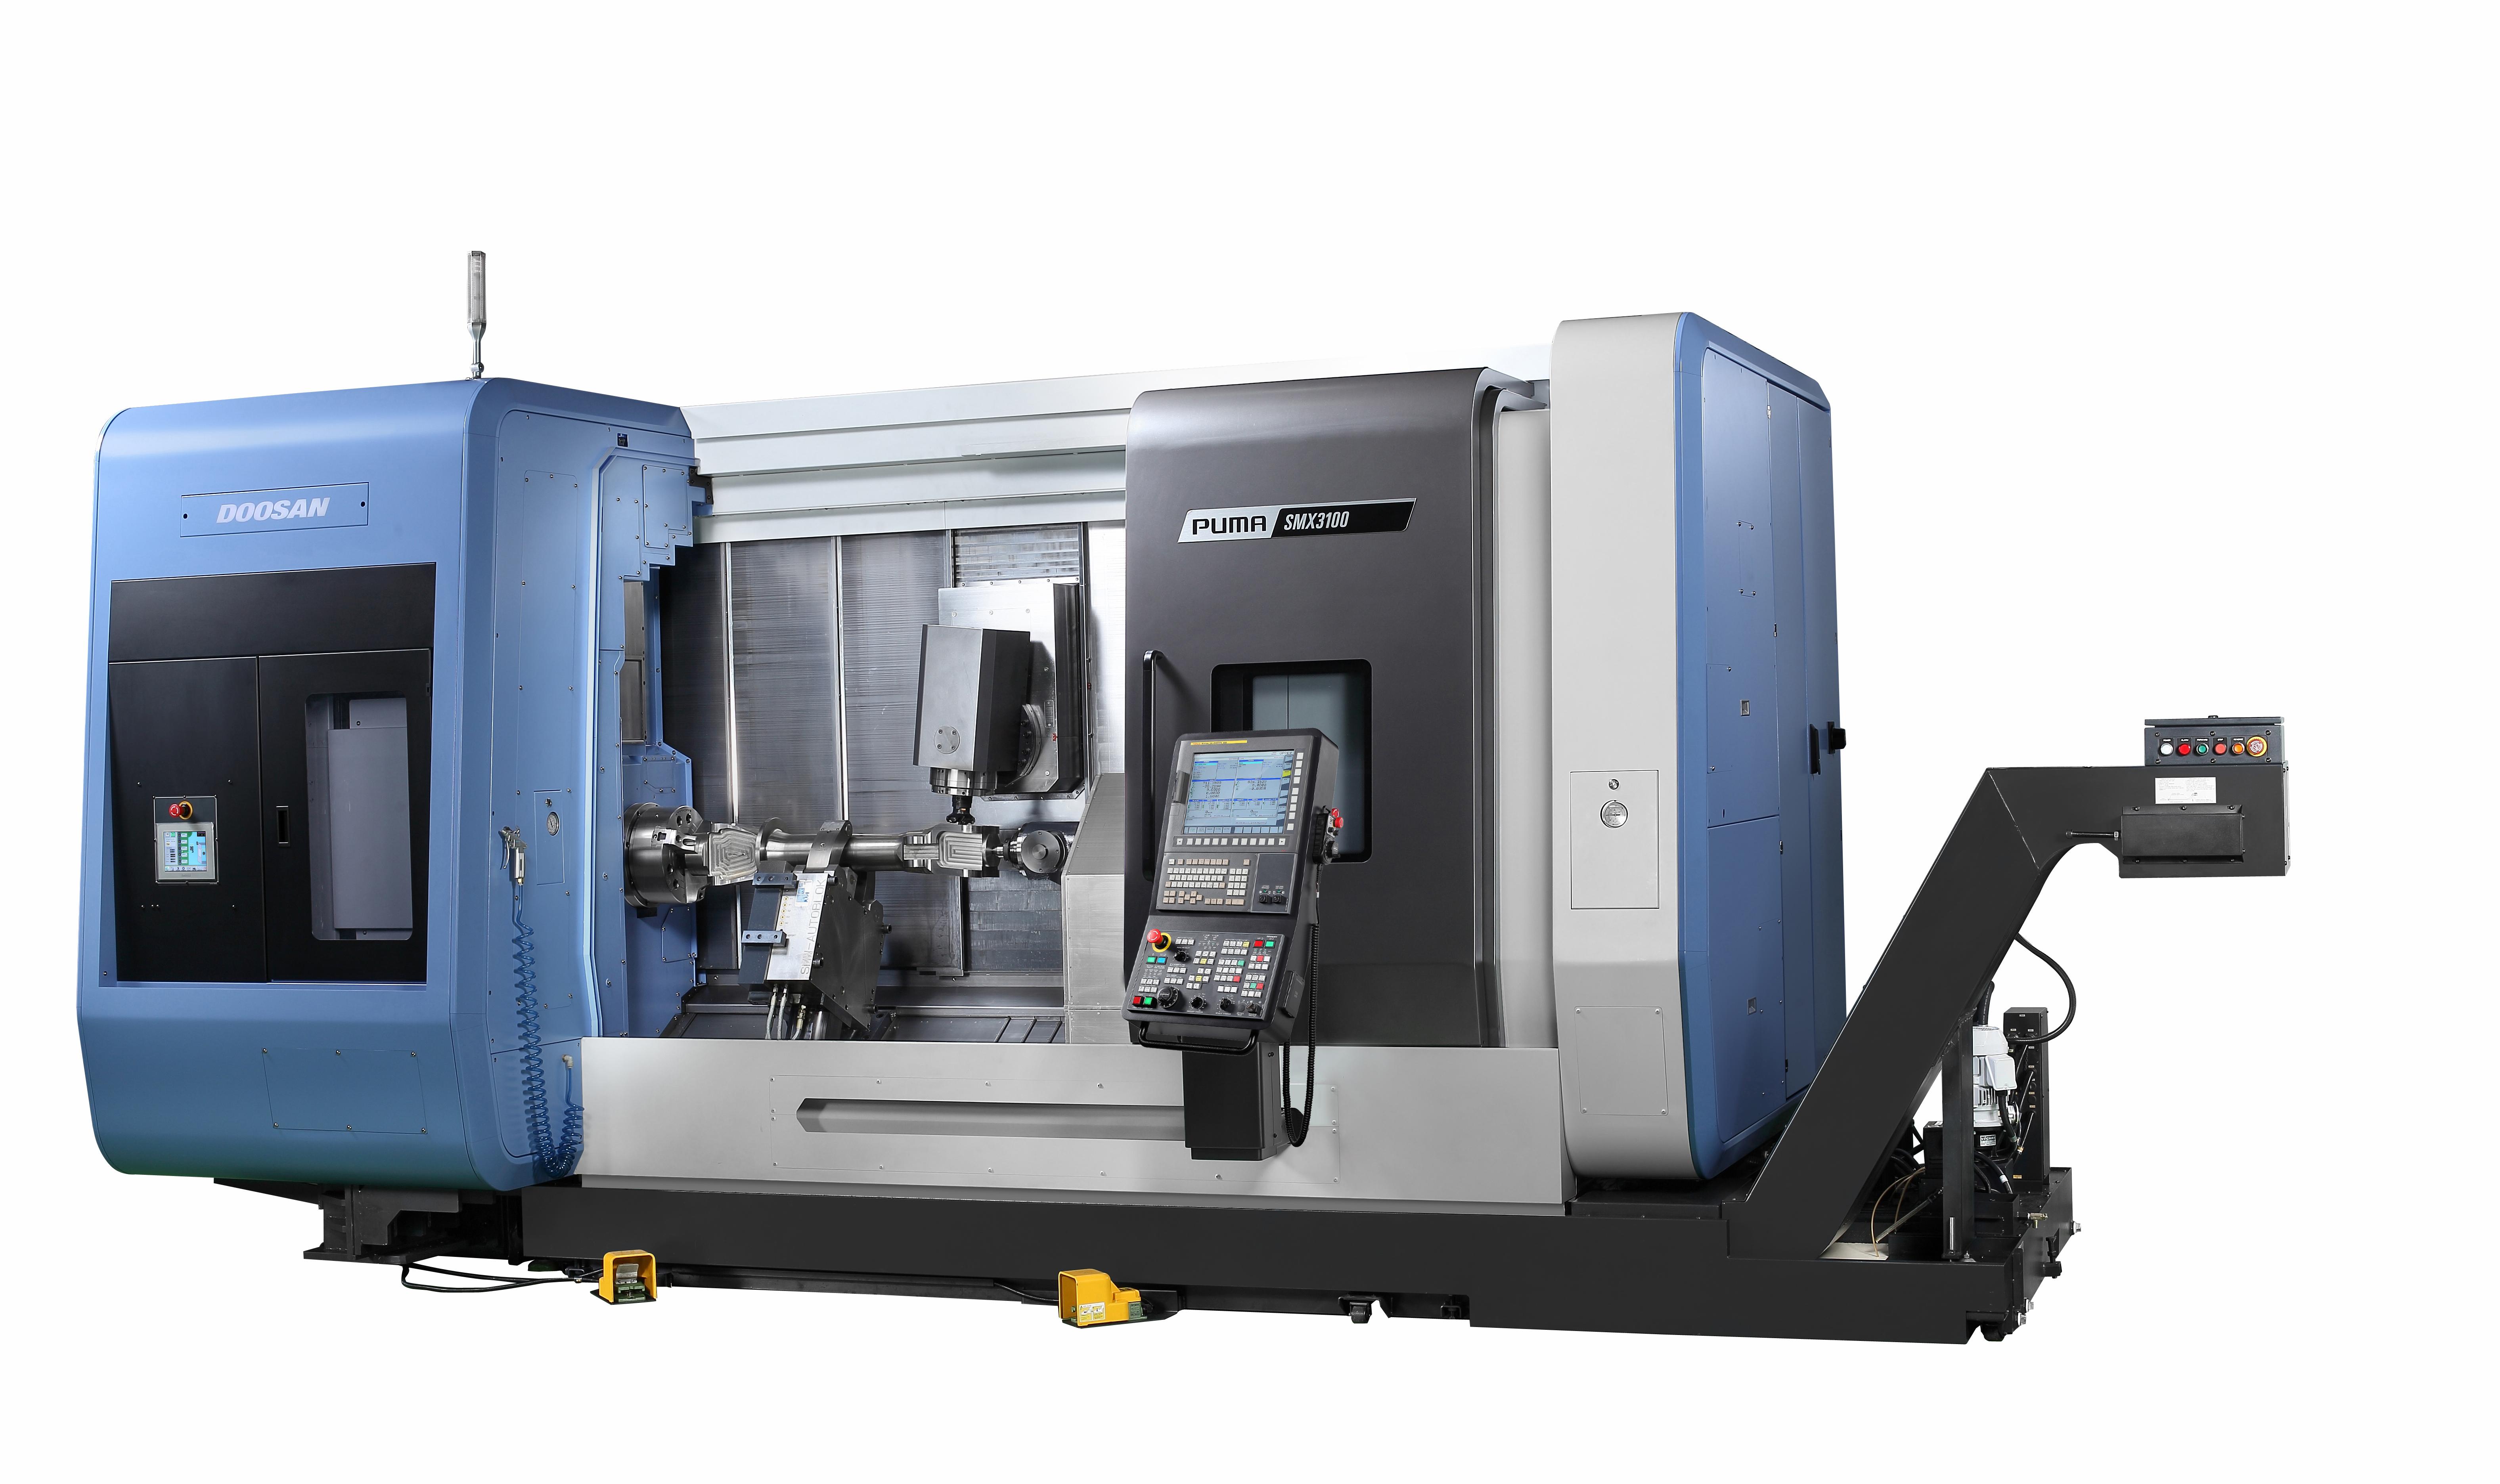 Doosan’s PUMA SMX3100ST multifunction mill-turn center boasts nine axes, dual spindles and an ATC capacity of up to 120 tools. (Image courtesy of Doosan Machine Tools America)